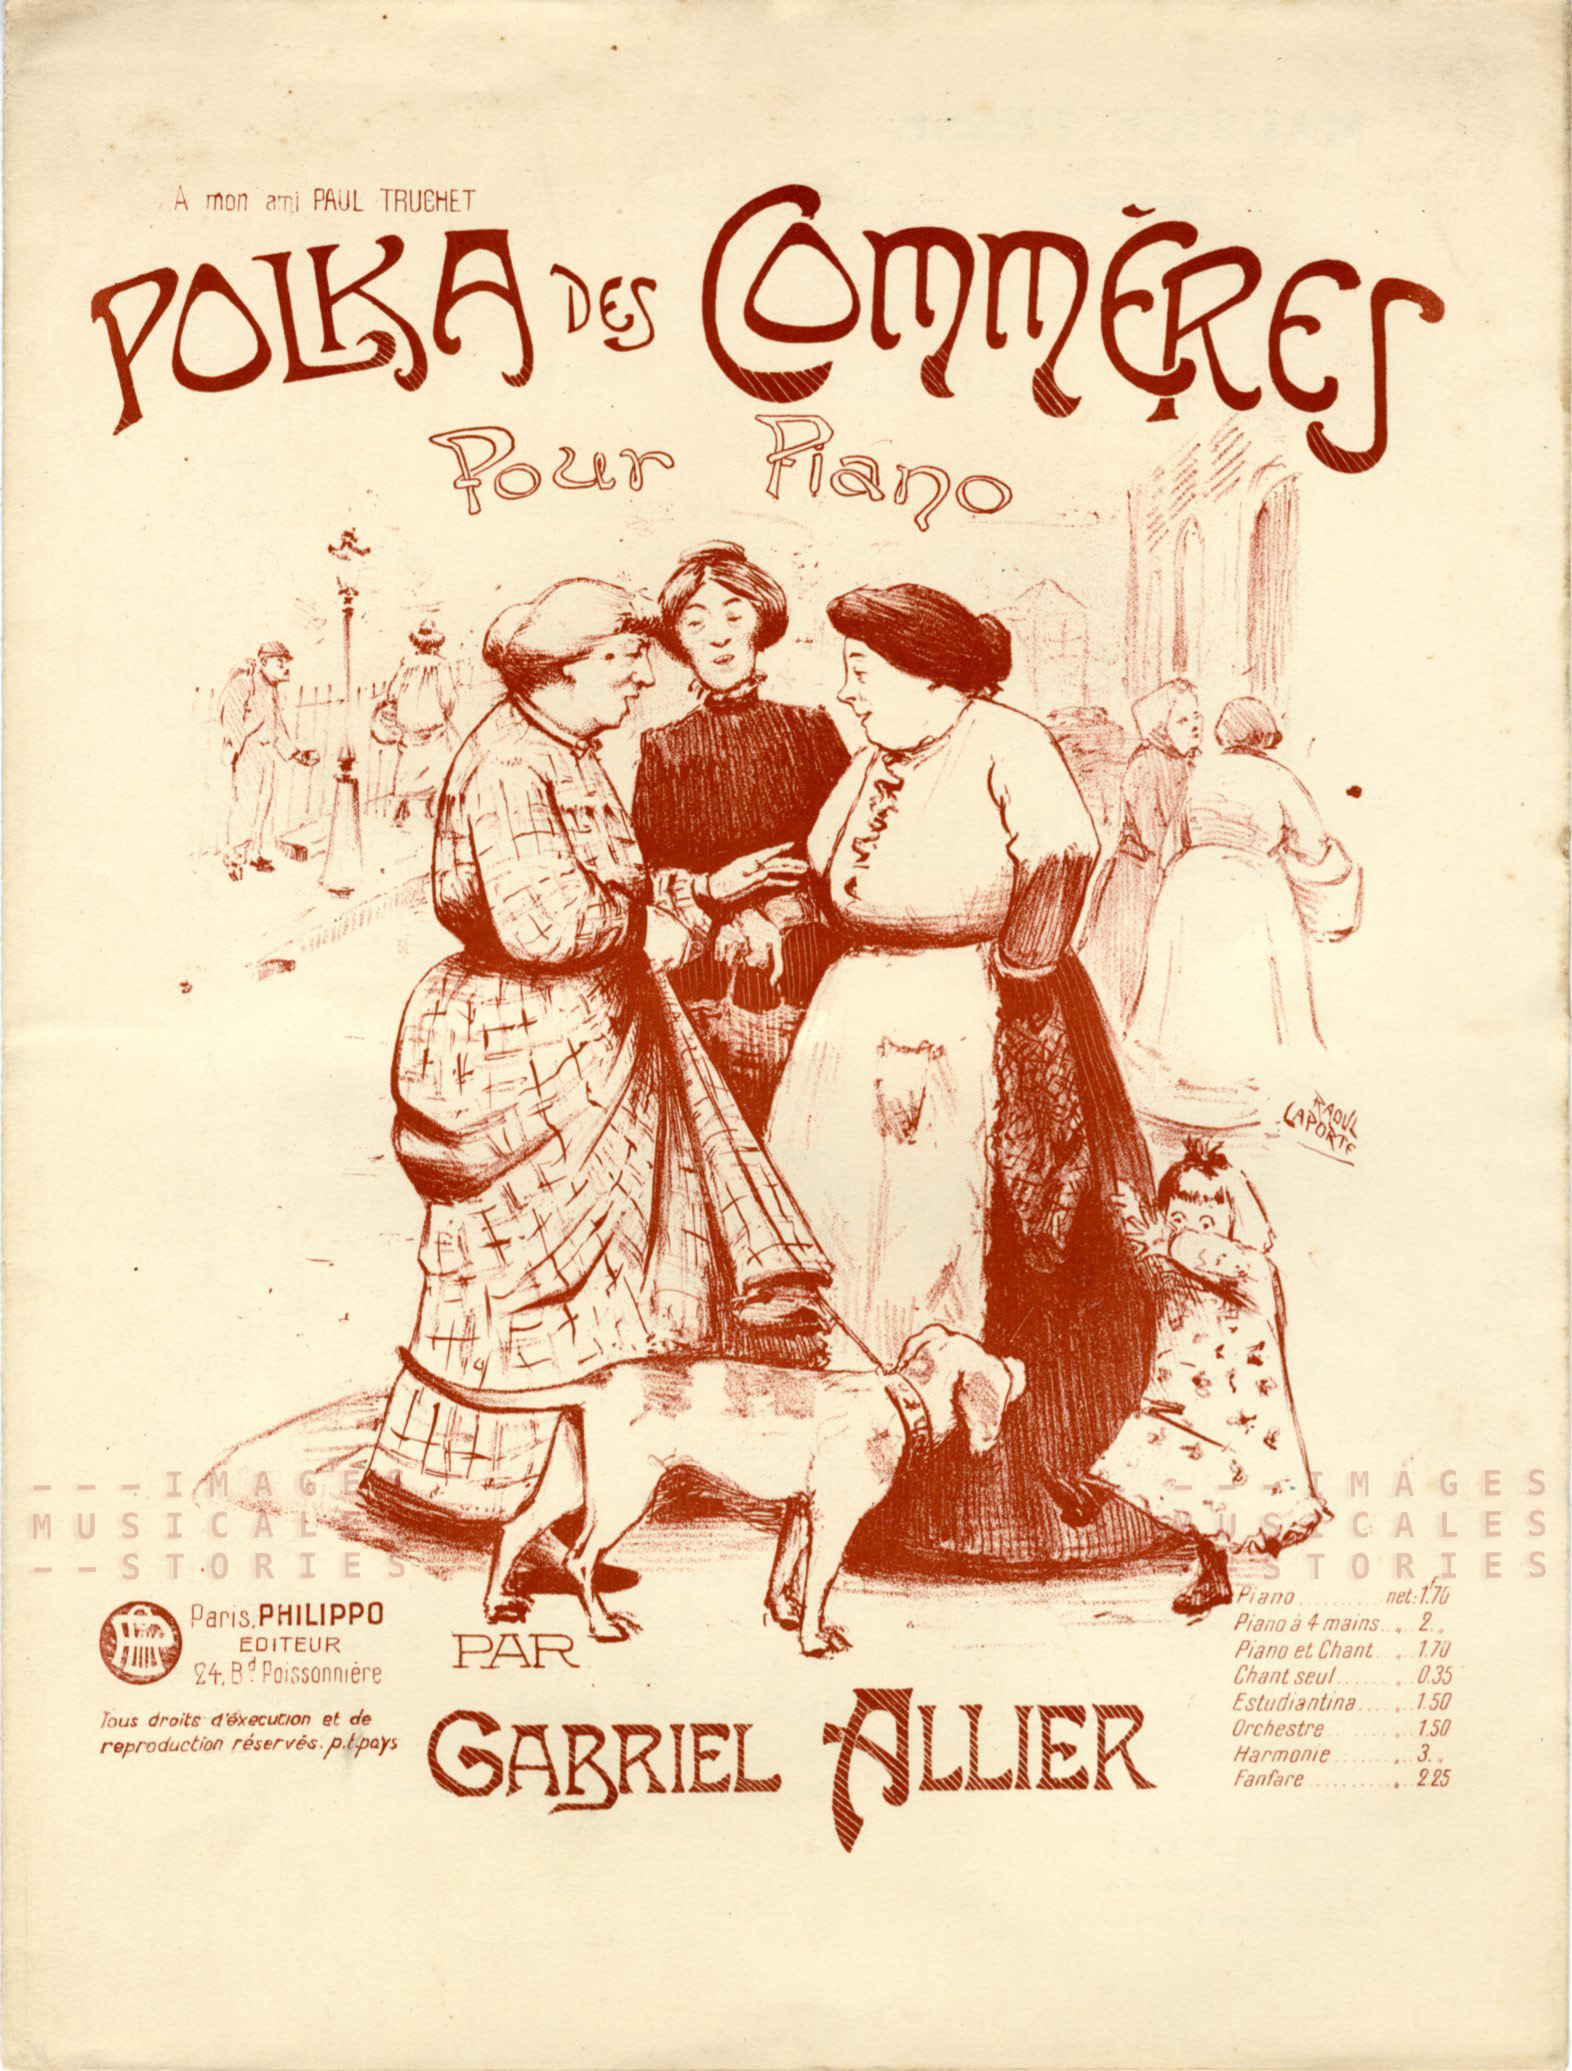 Polka des Commères, sheet music cover illustrated by Laporte